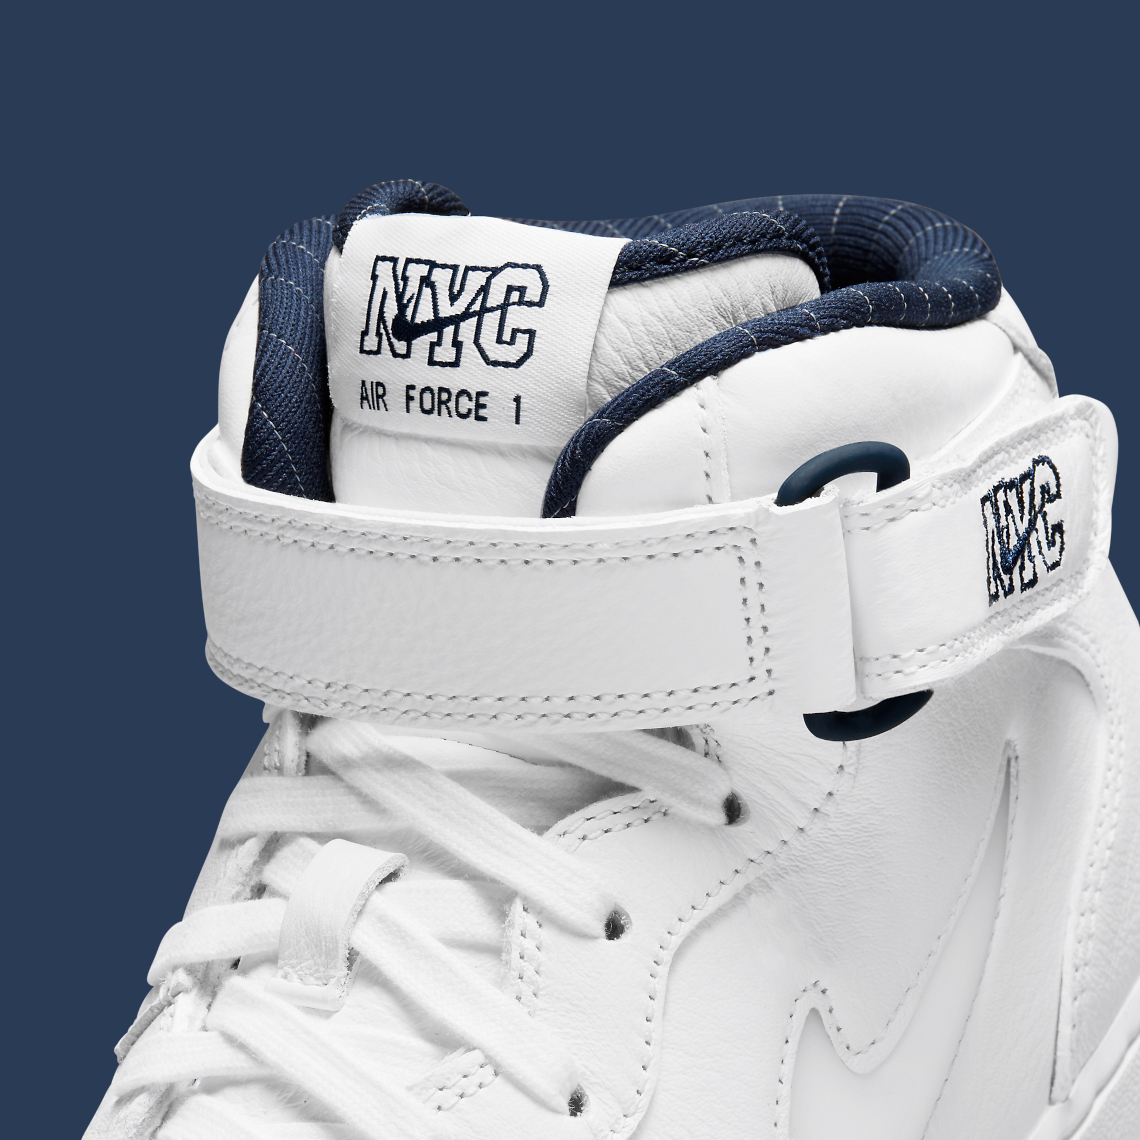 Nike Air Force 1 Mid White Navy NYC DH5622-100 | SneakerNews.com